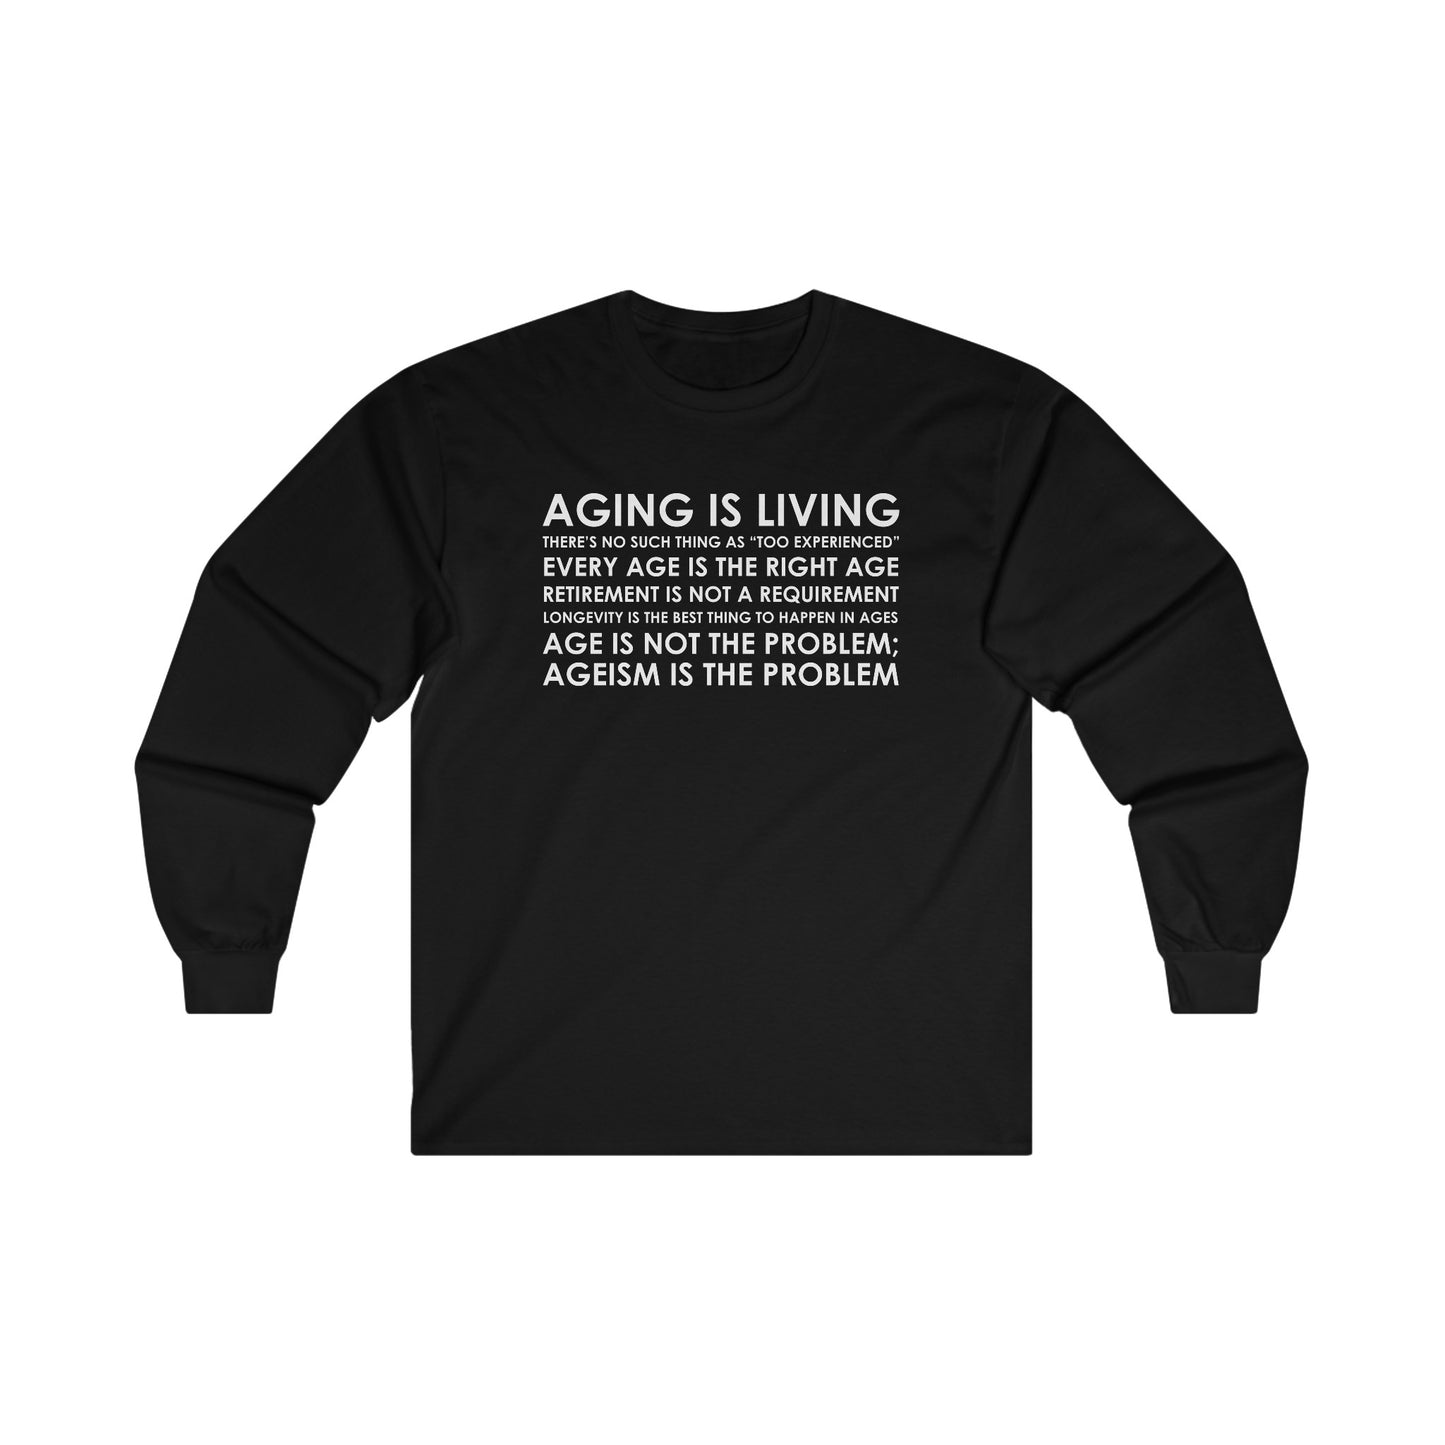 “Aging Is Living” Unisex Long Sleeve T-Shirt